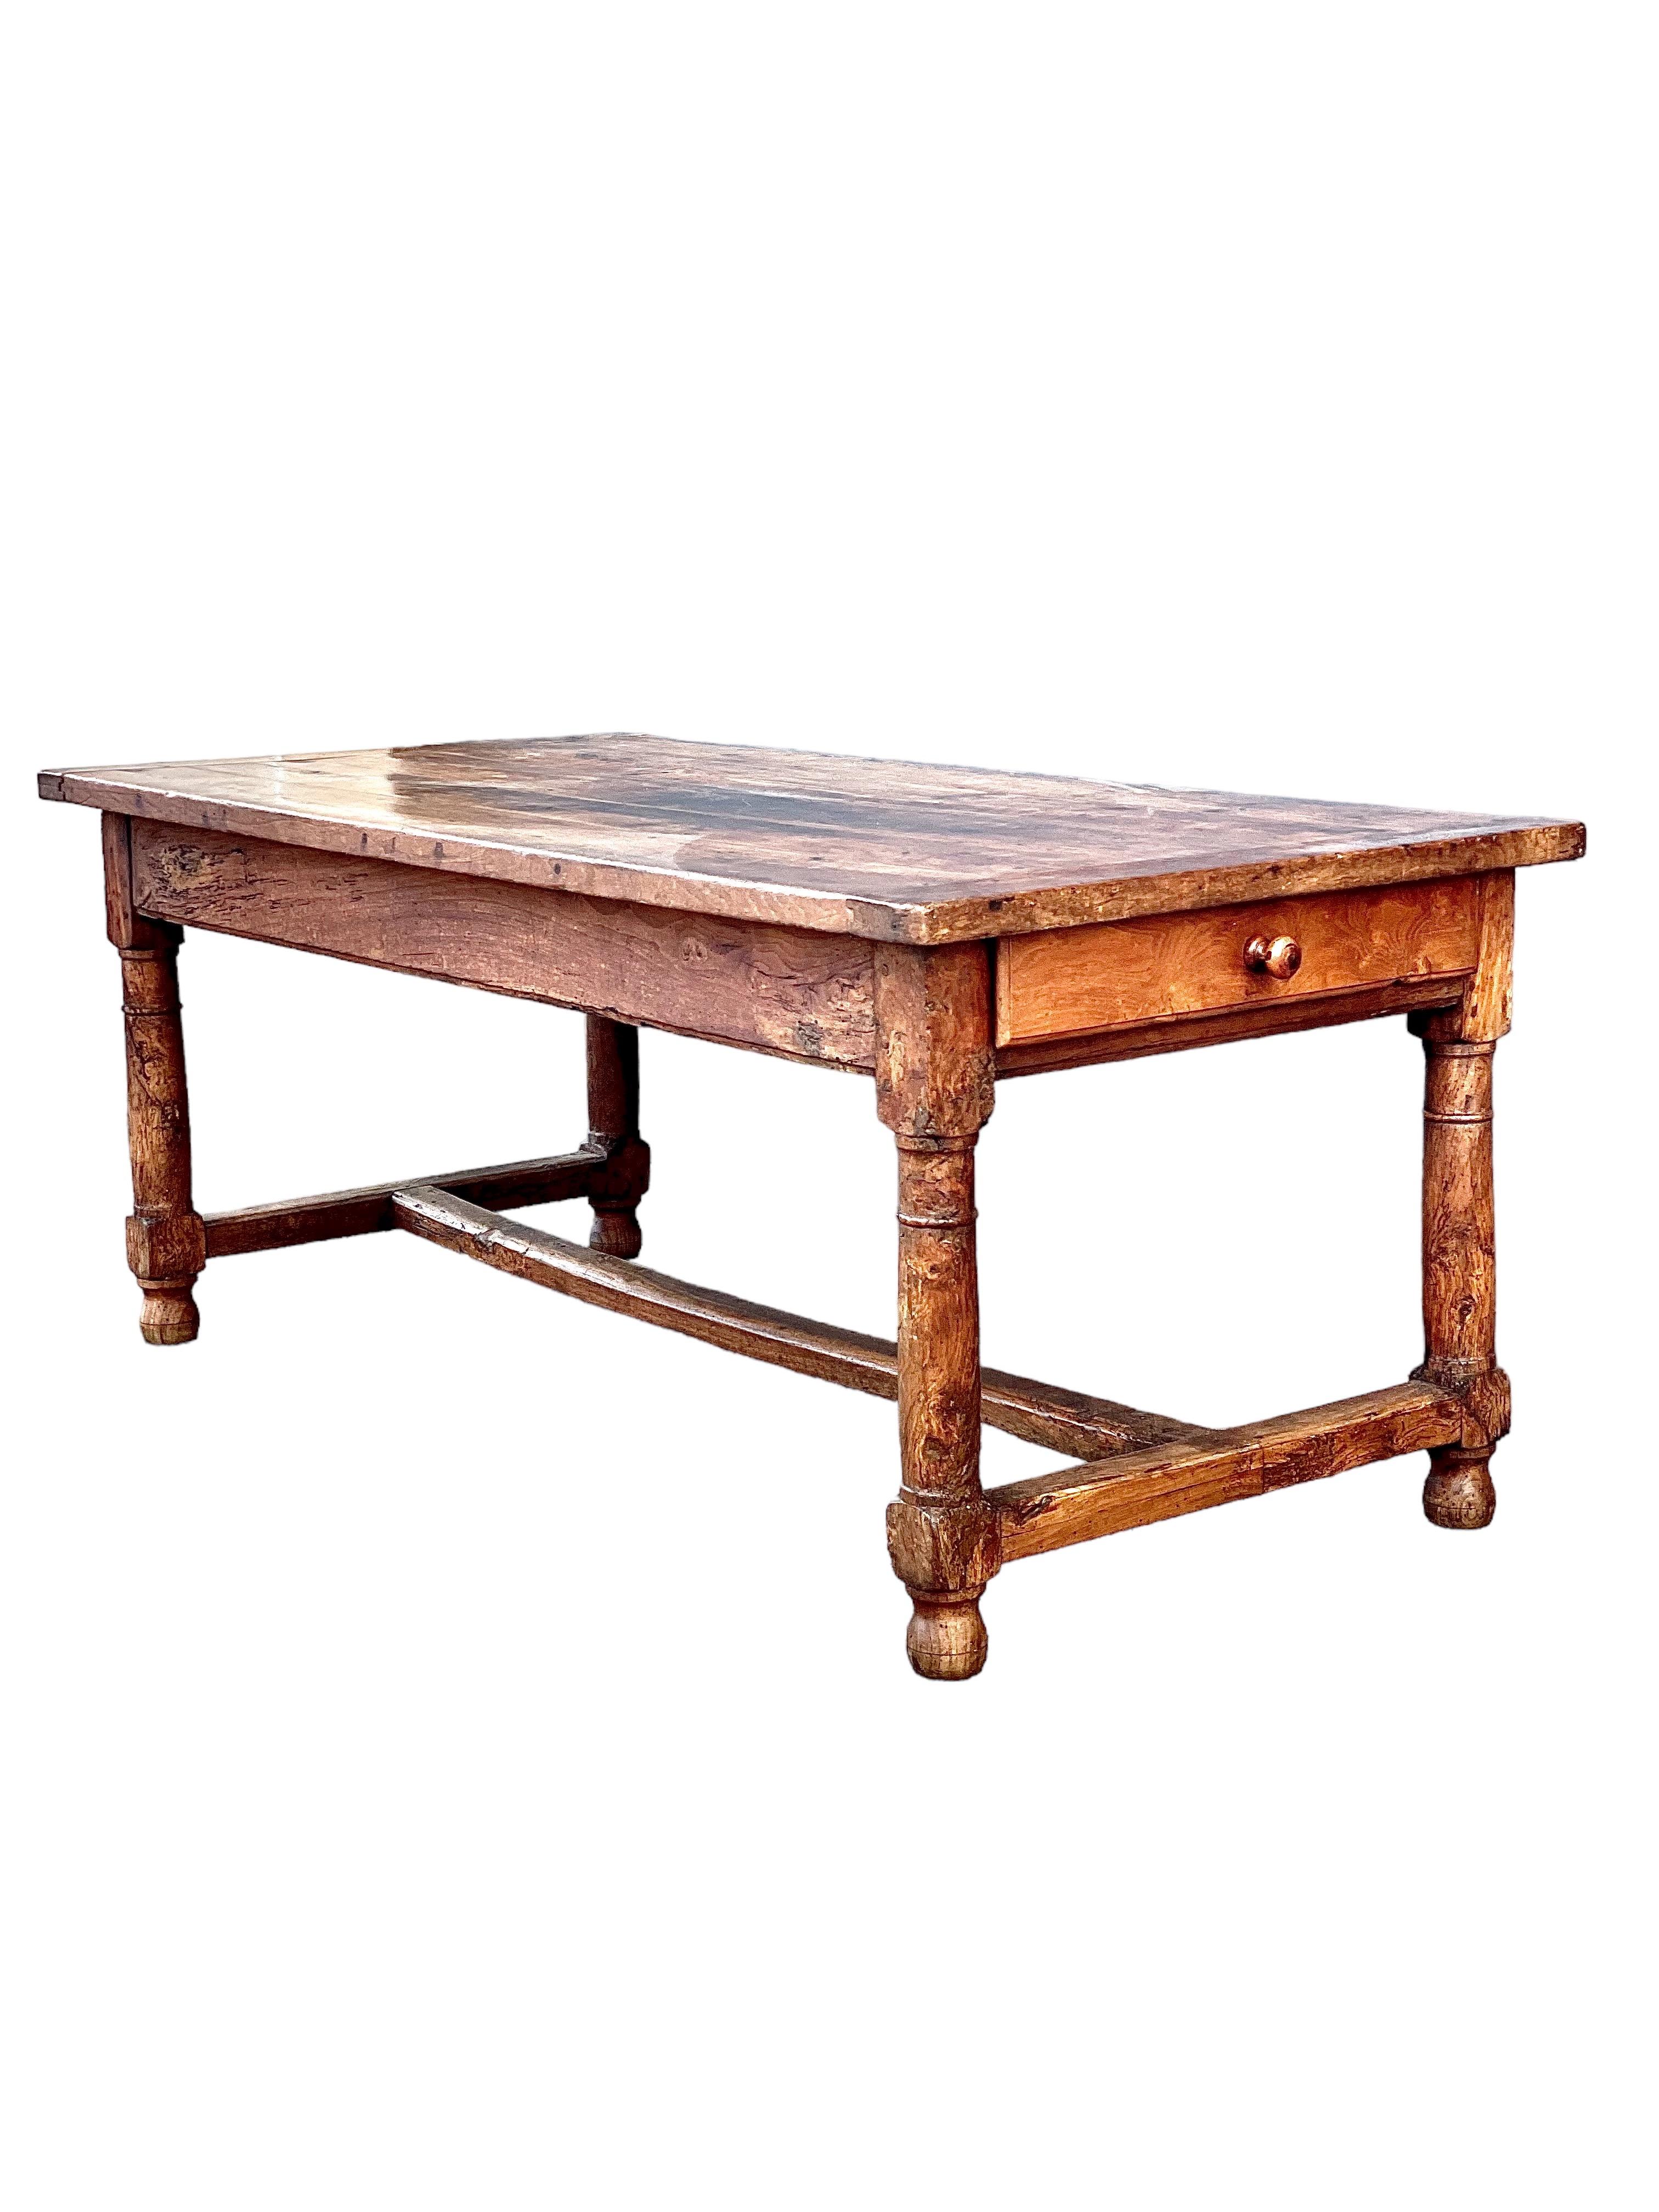 A wonderful French farmhouse kitchen table, dating from the 18th century and full of character. This sturdy, rectangular table has its original, planked top and cleated ends, and stands on thick, baluster-turned legs, joined by an 'H' stretcher,